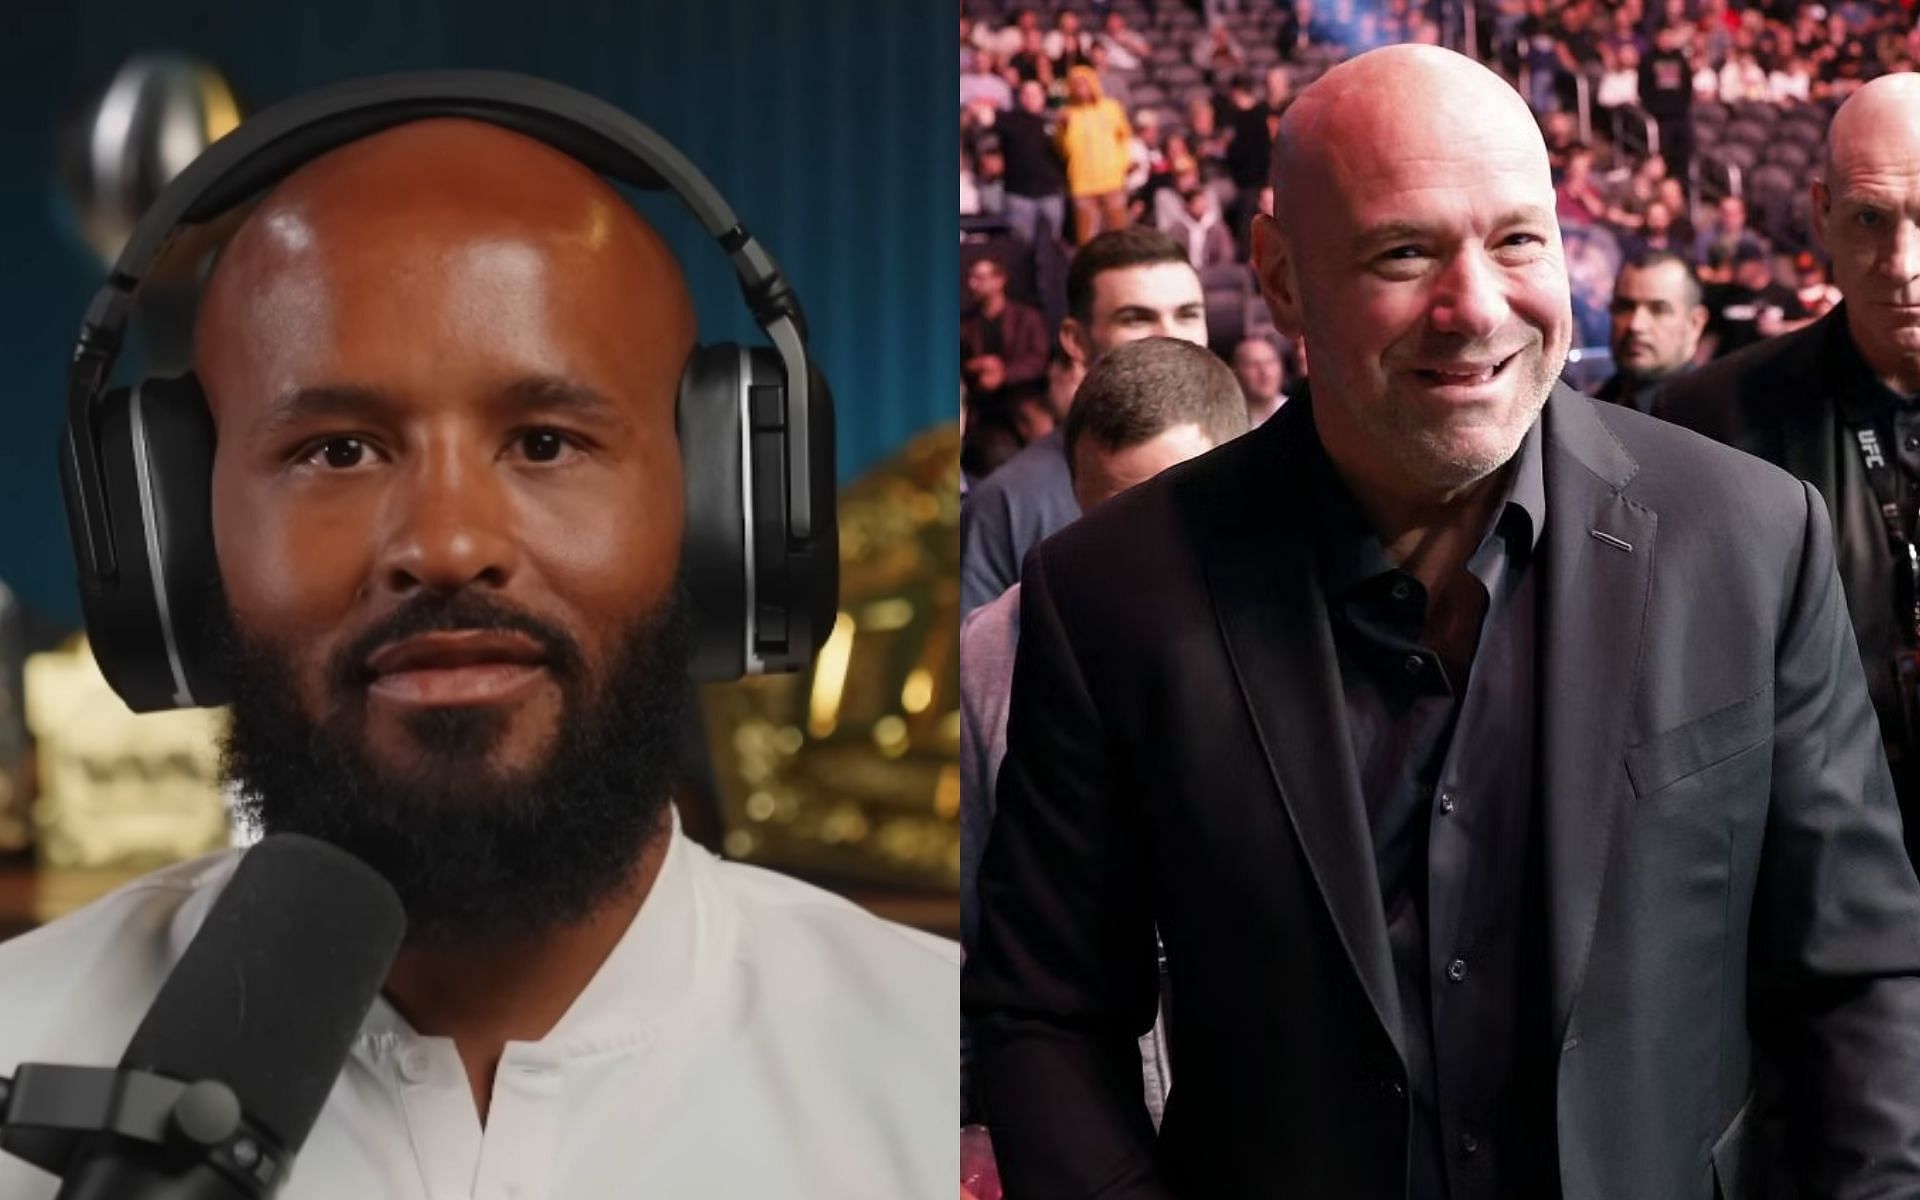 Demetrious Johnson drops bombshell, says UFC gave quarterly incentives to fighters based on Instagram traffic [Image courtesy: Mighty - YouTube, and Getty Images]